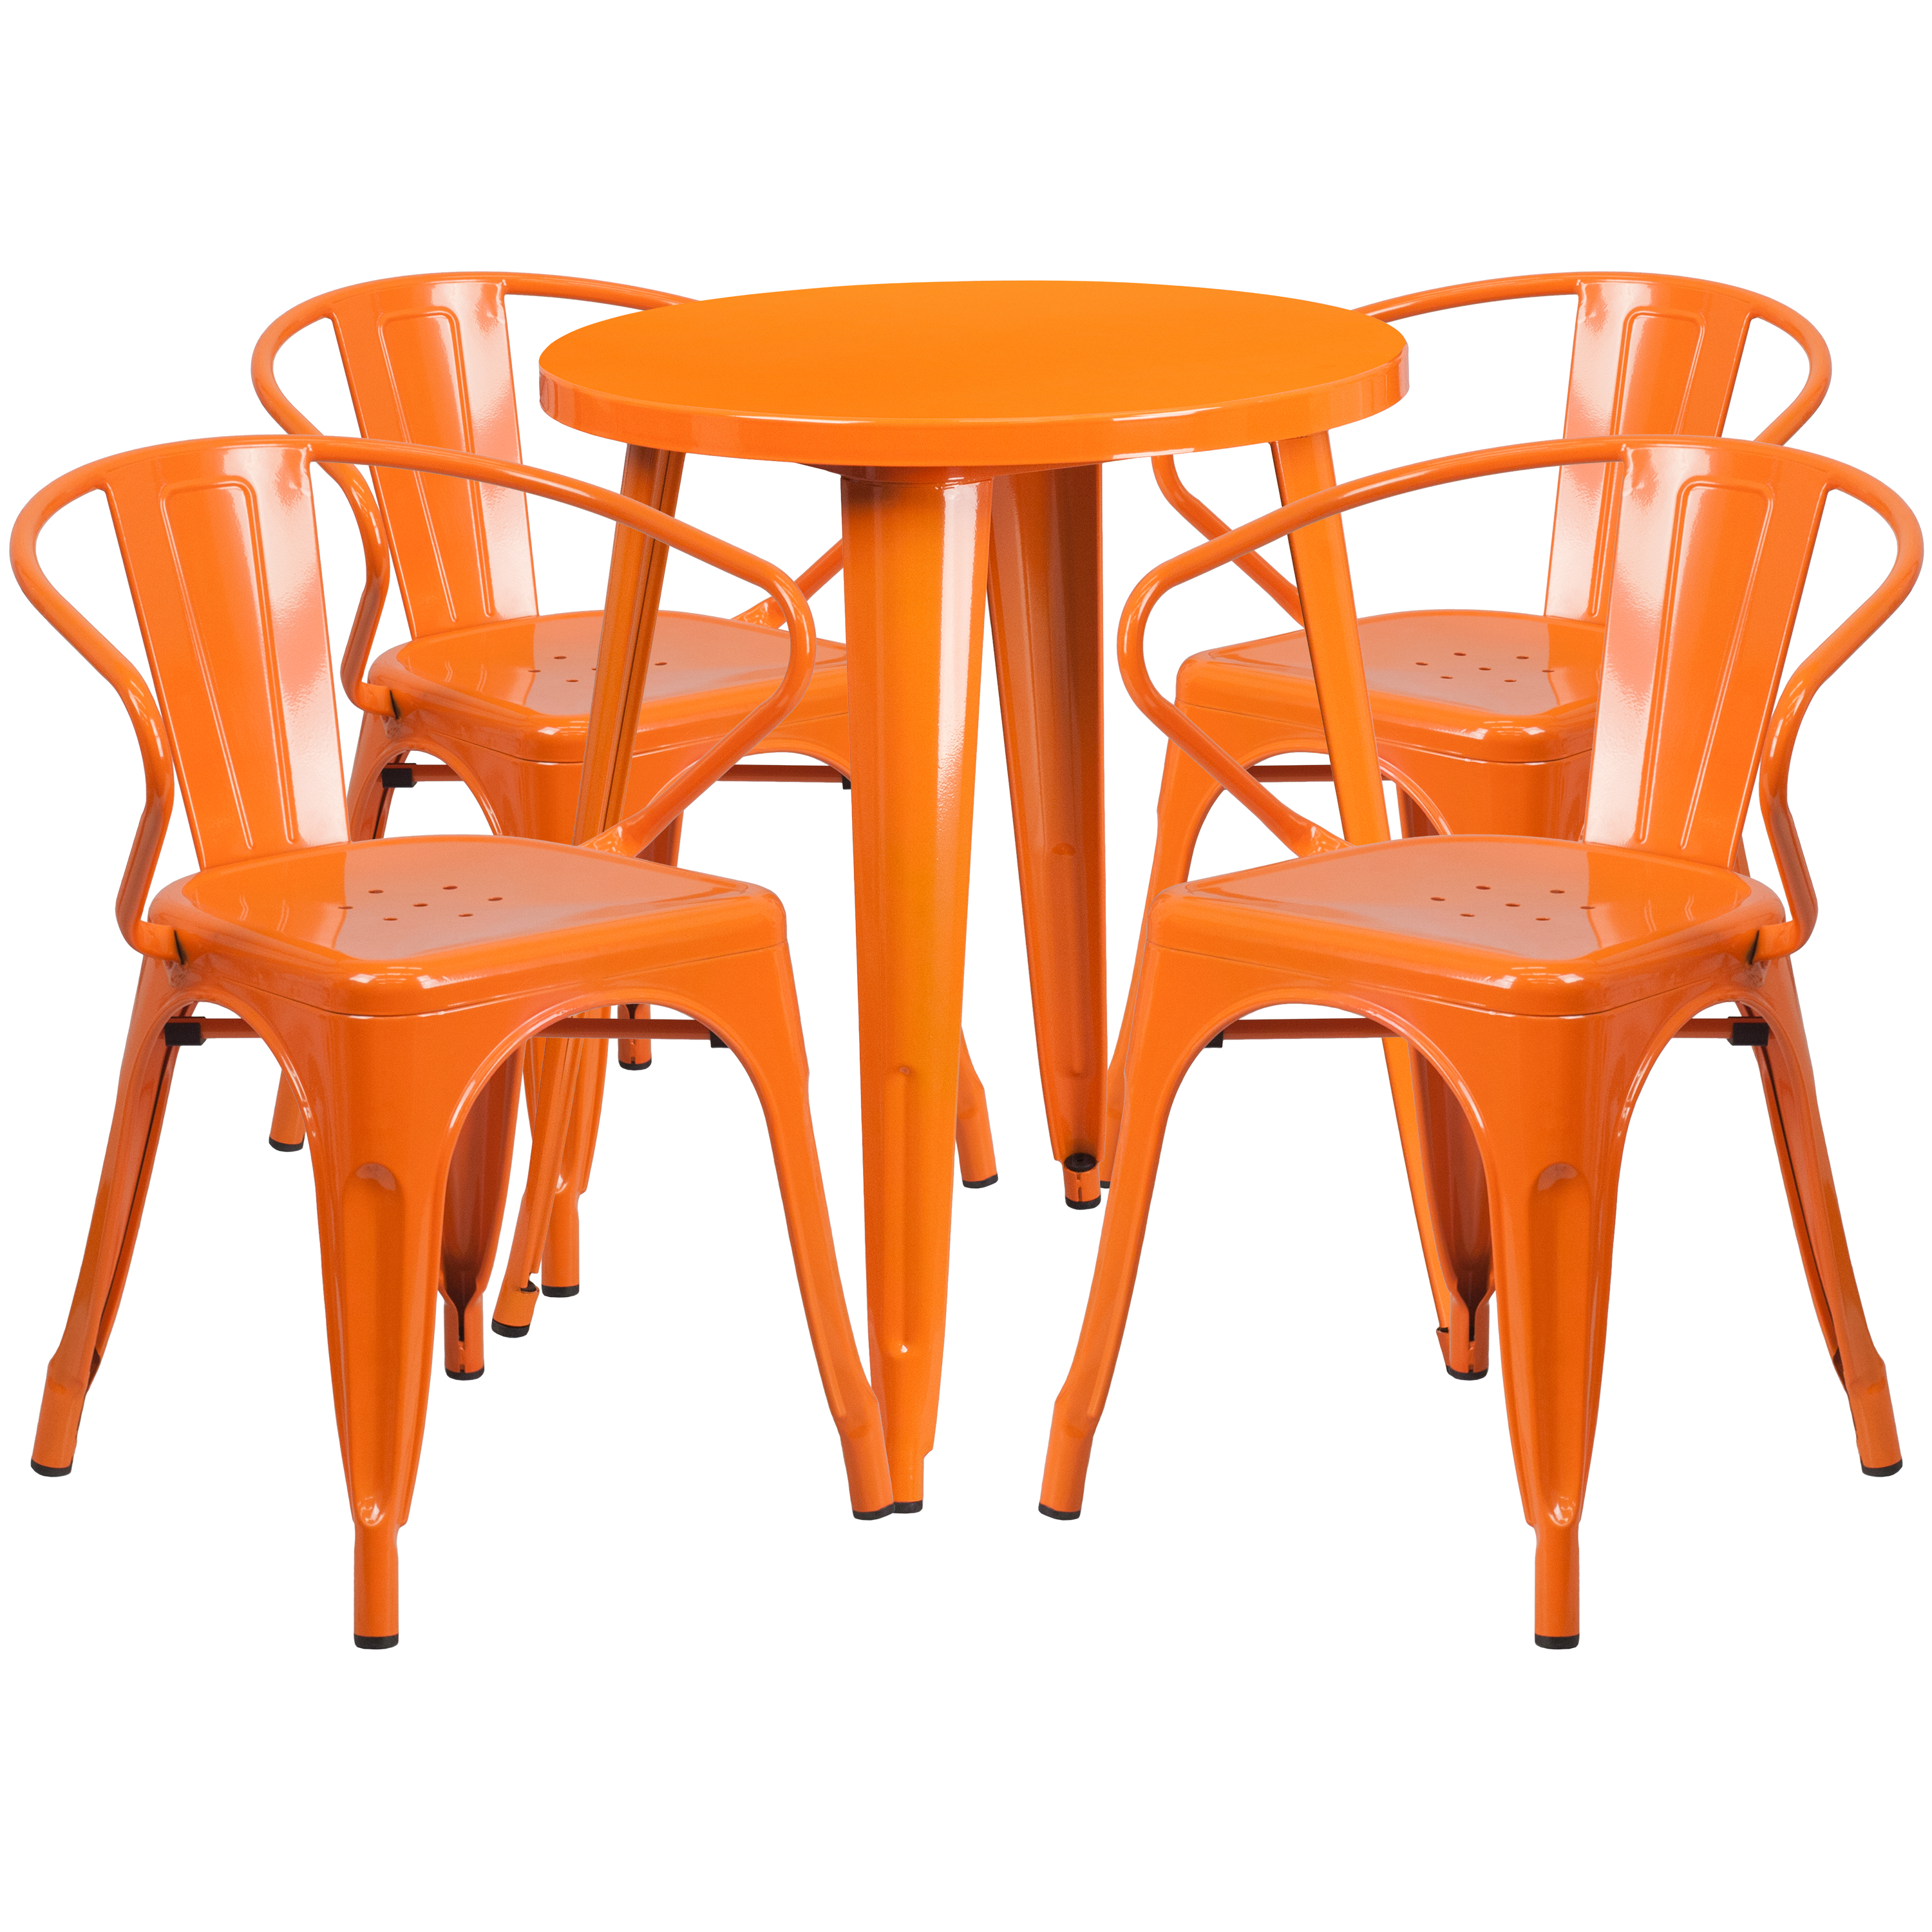 Flash Furniture CH-51080TH-4-18ARM-OR-GG 24" Round Orange Metal Indoor/Outdoor Table Set with 4 Arm Chairs